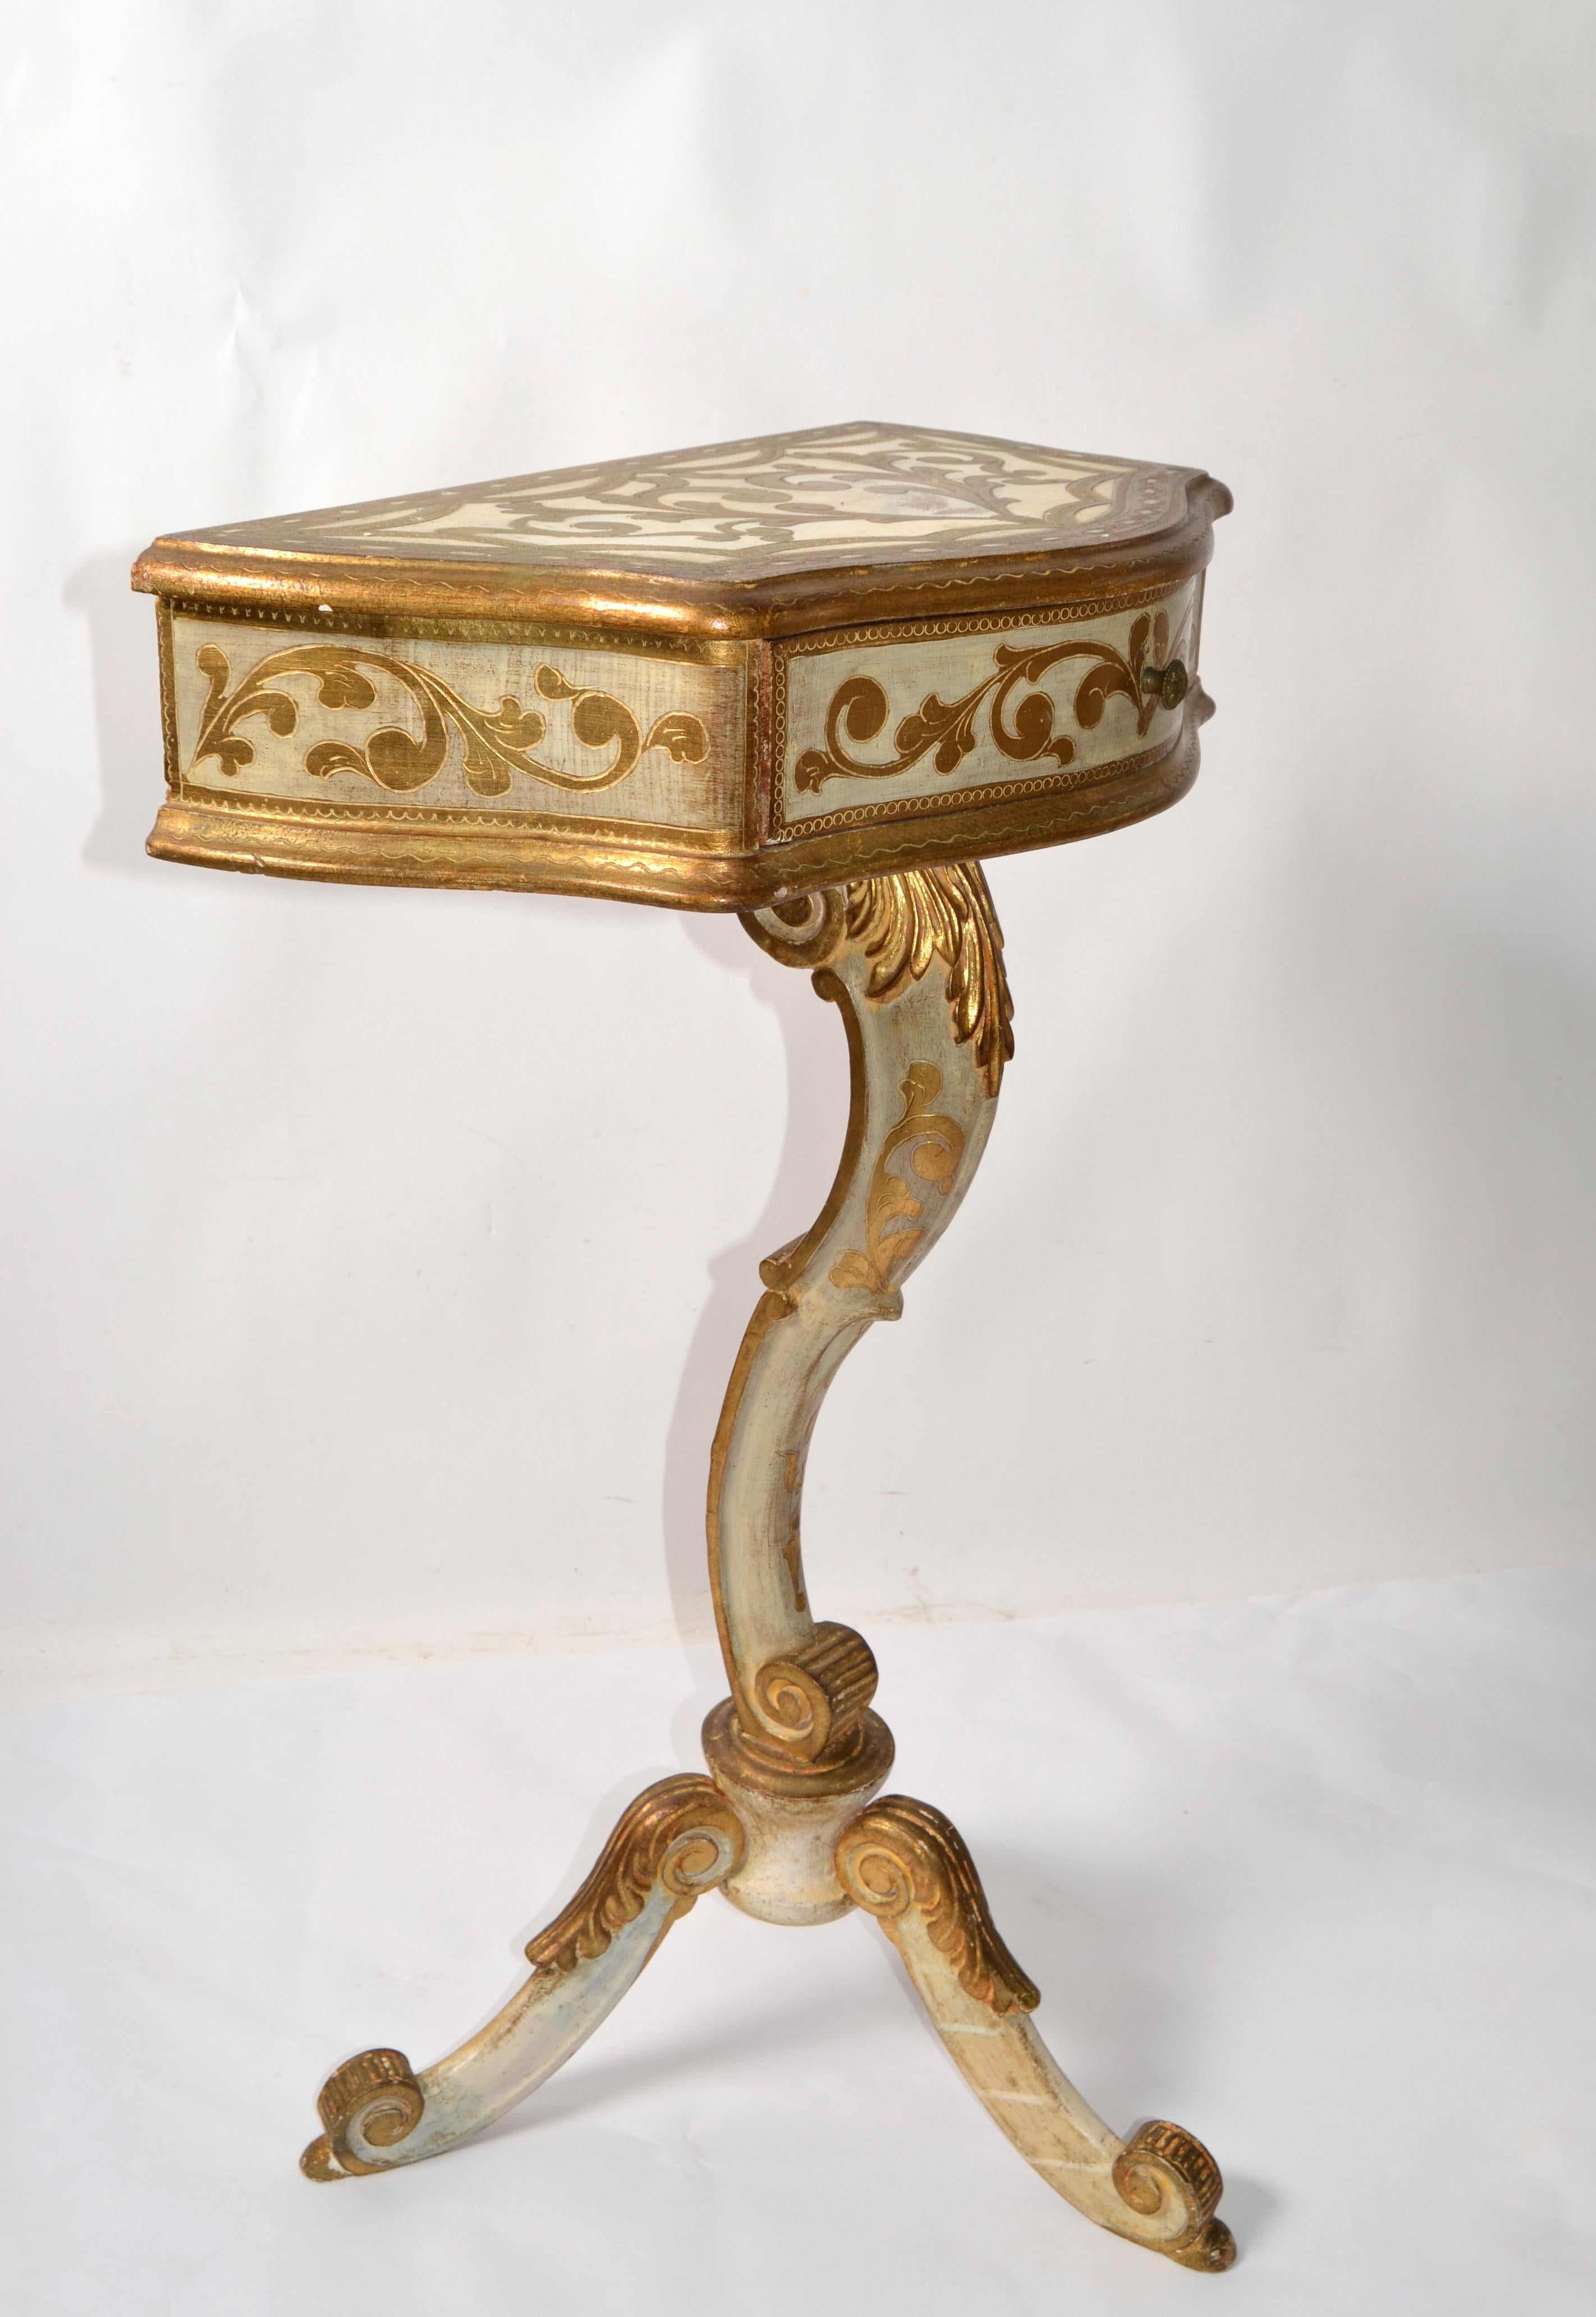 20th Century Giltwood Florentine Side Table Hand Carved Tripod Scrolled Base In Good Condition For Sale In Miami, FL